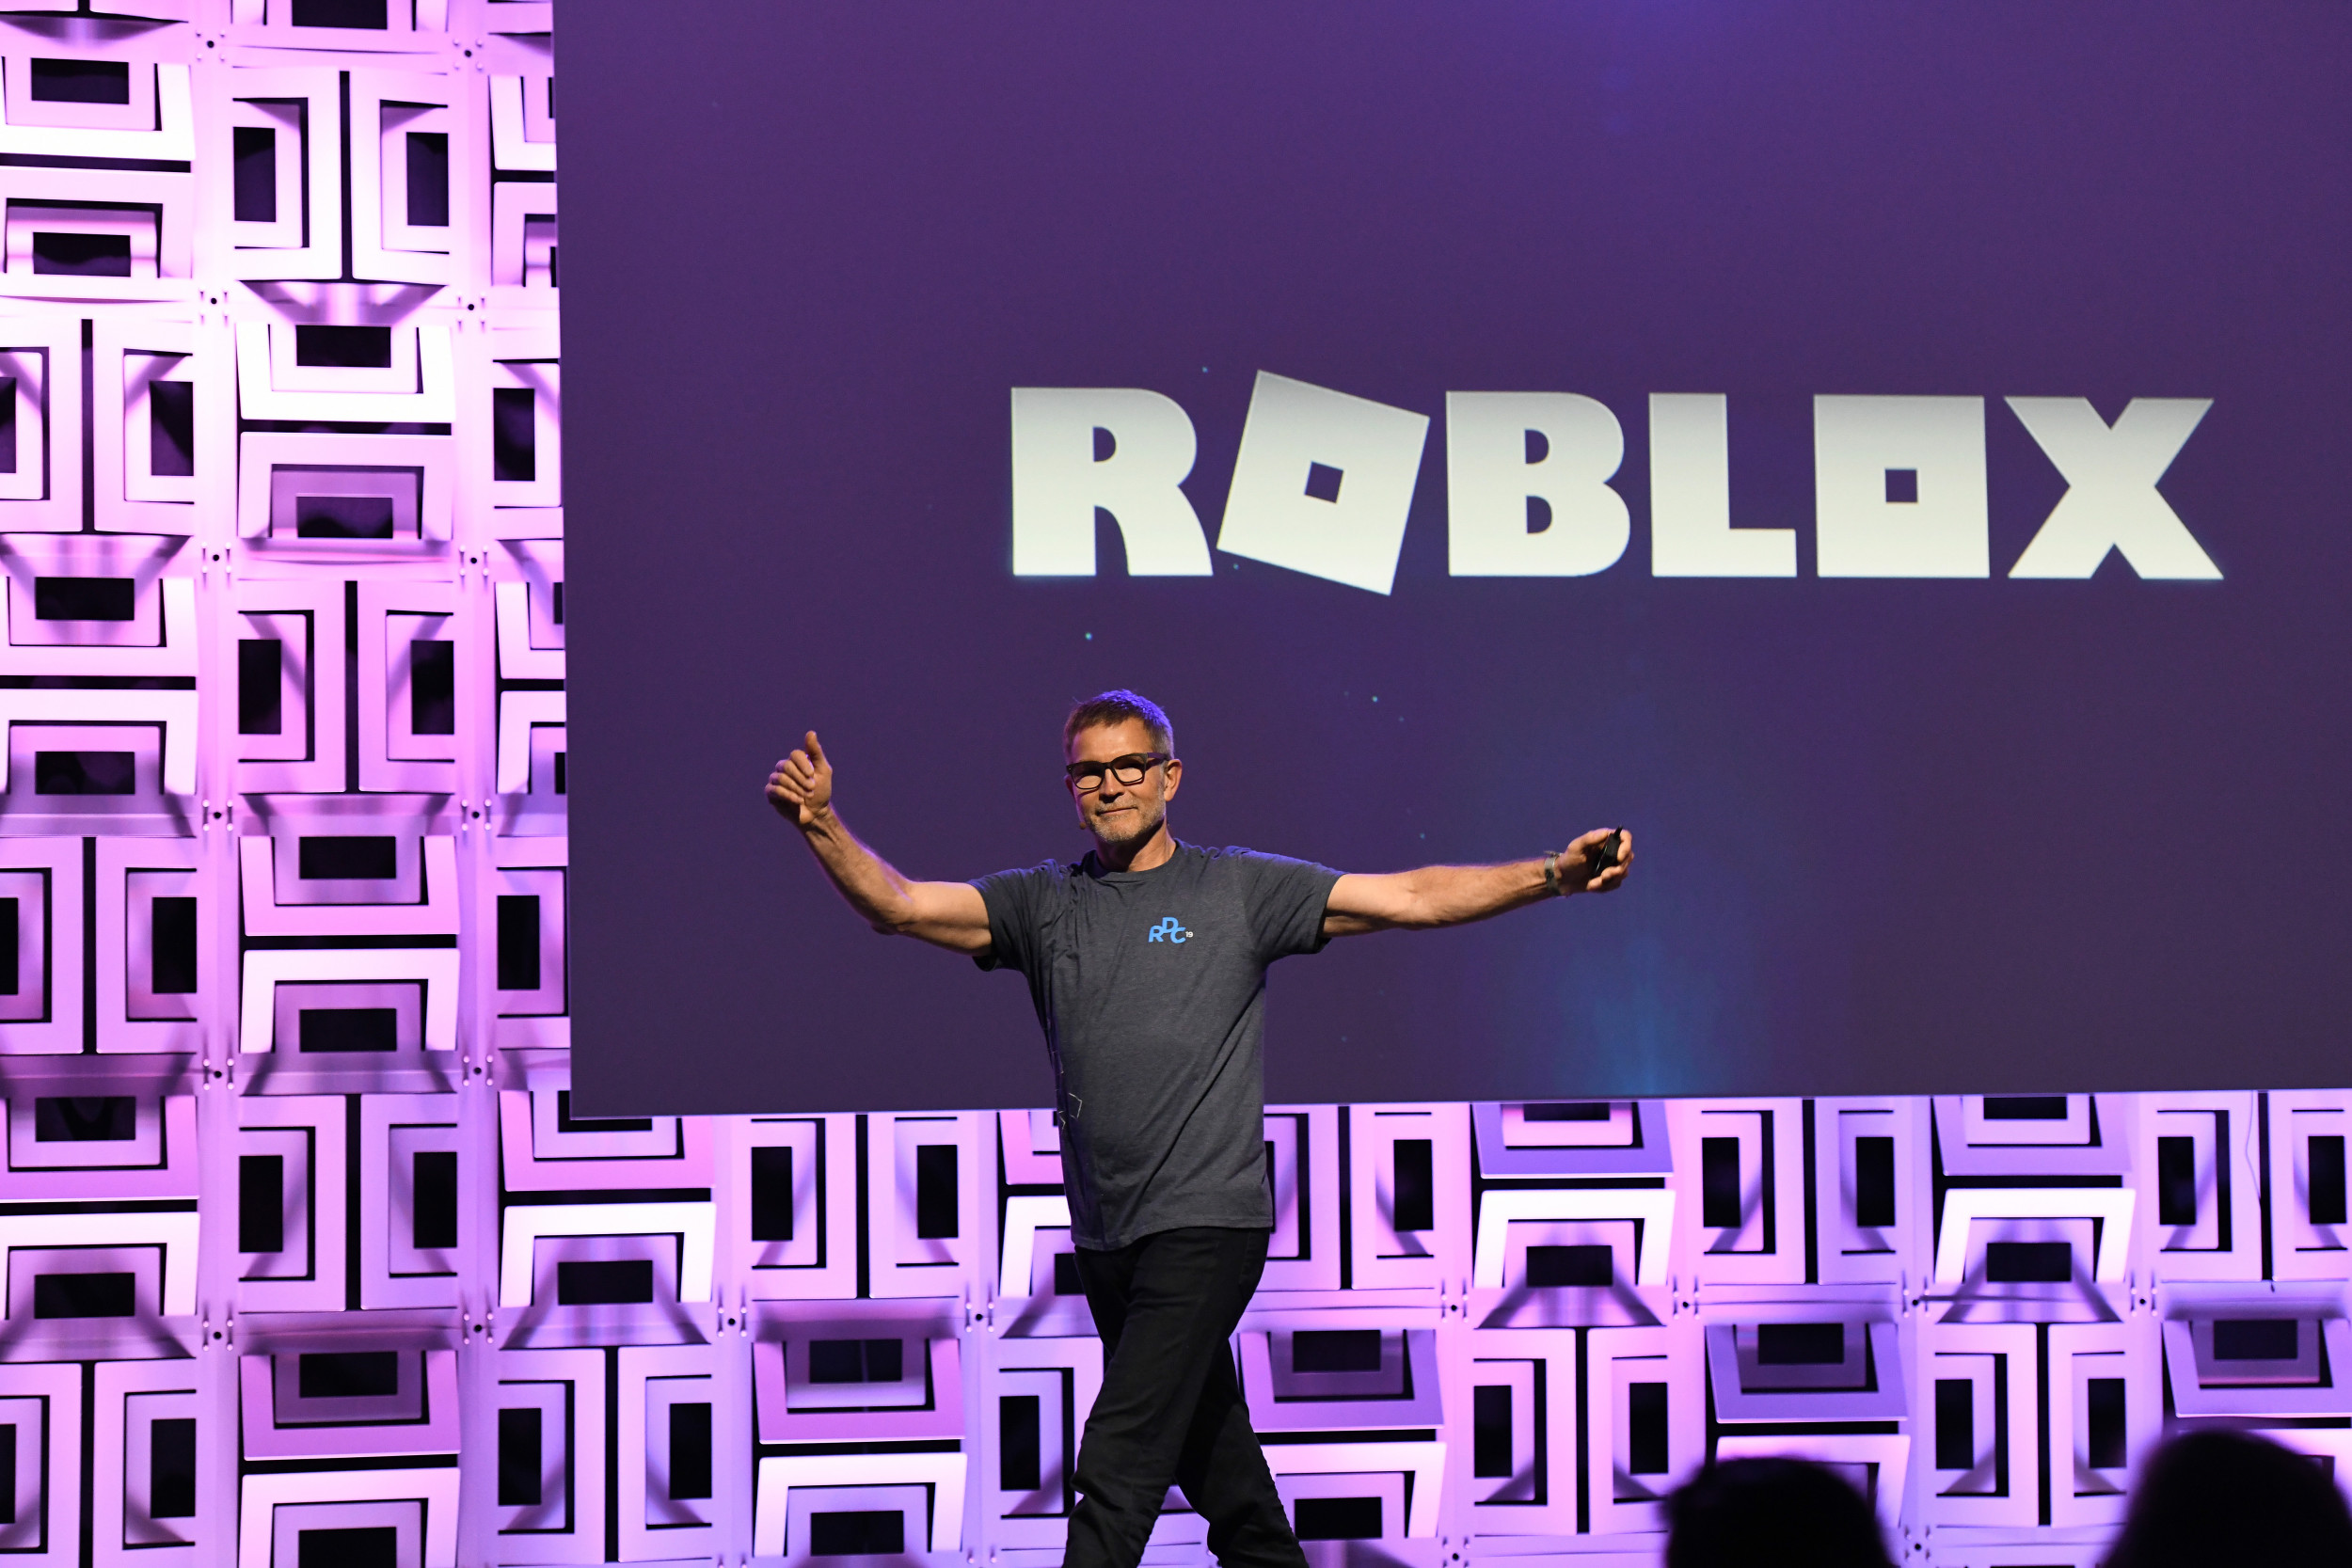 What Is Roblox Gaming Firm Valued At 45 2 Billion After Going Public On Nyse - 2006 roblox players